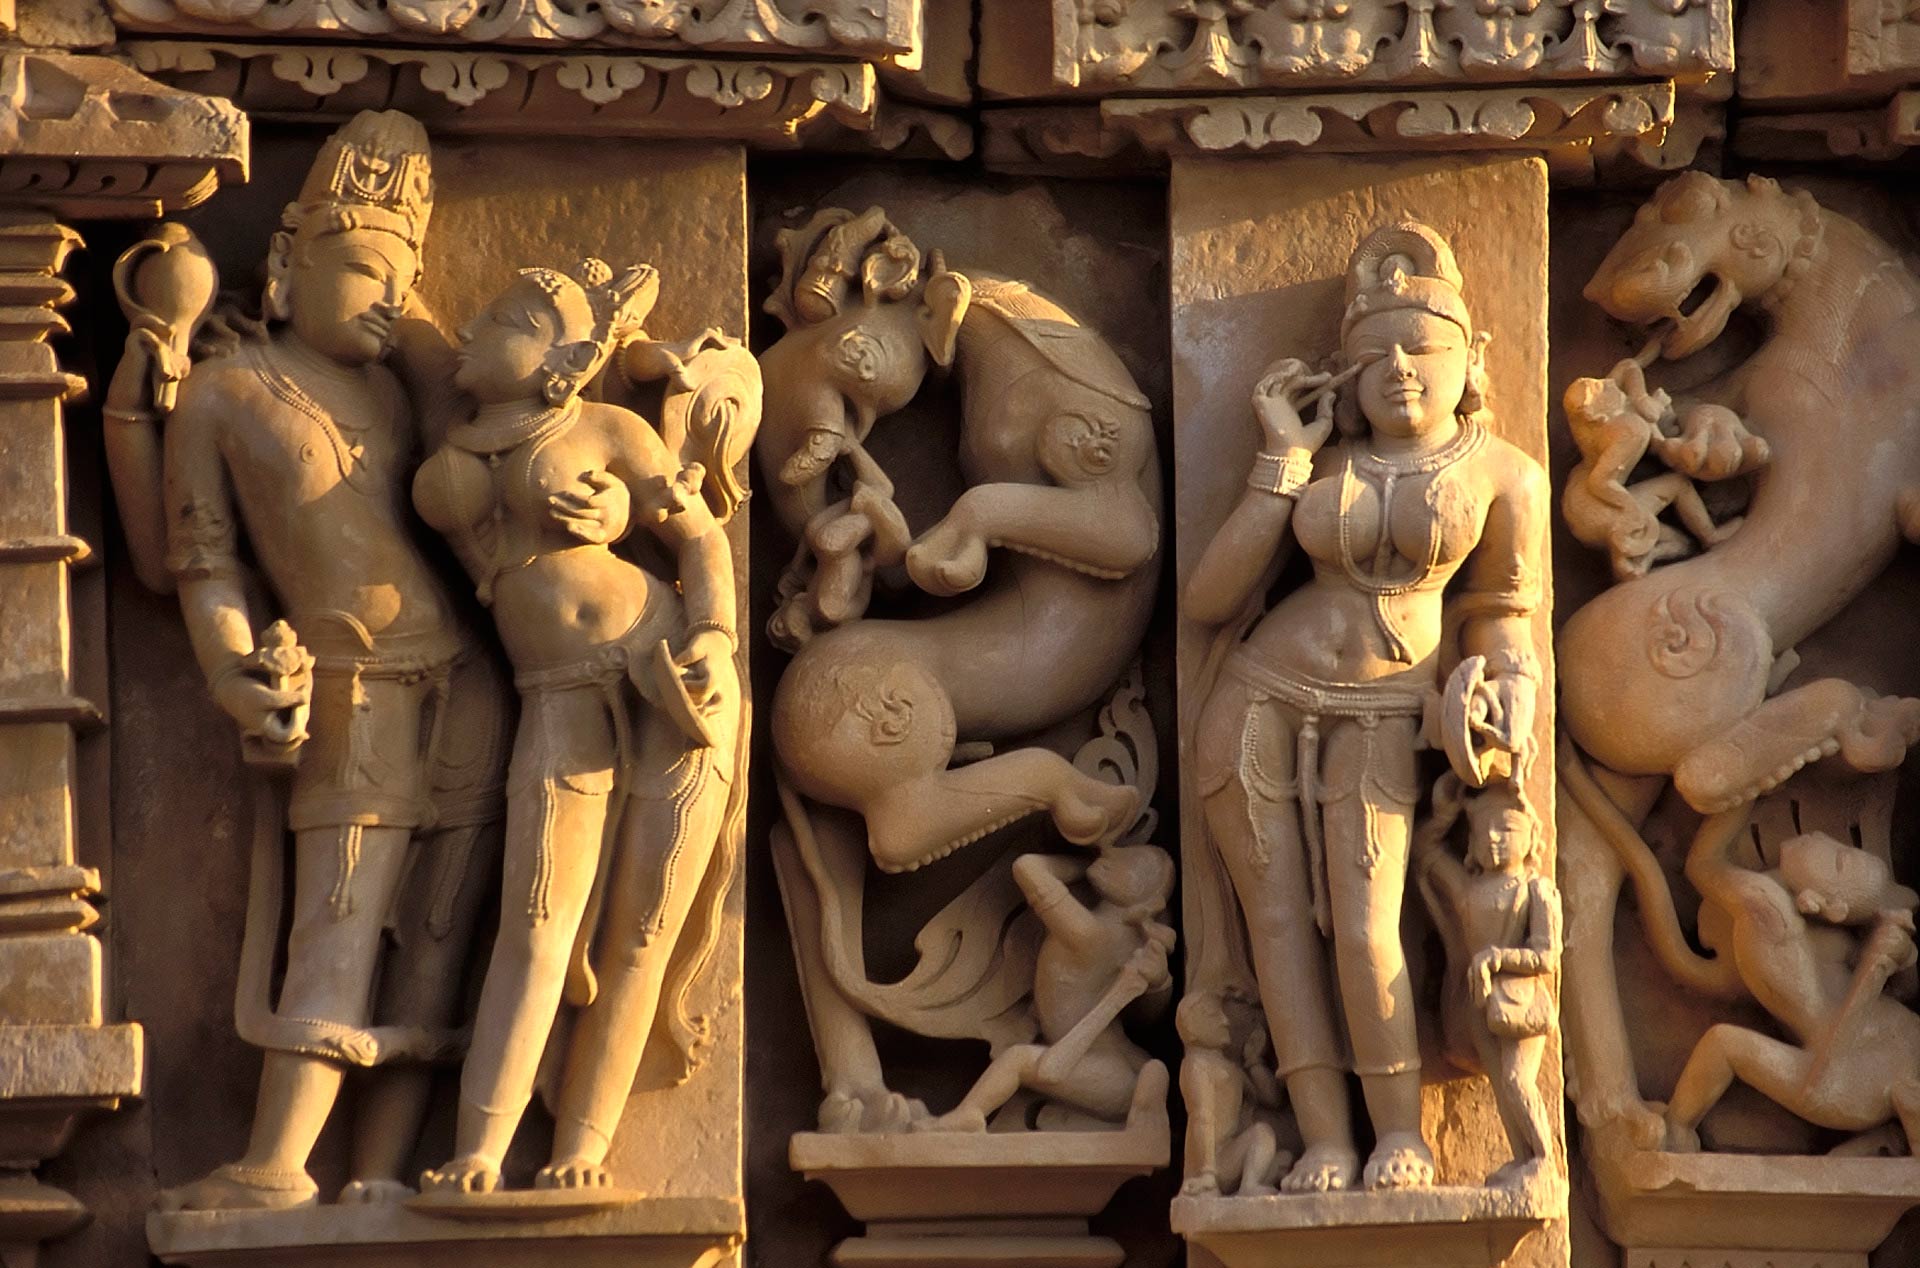 Apsara applying collyrium at the Parsvanath Temple located in the Eastern group of the Khajuraho Group of Monuments, Madhya Pradesh, India